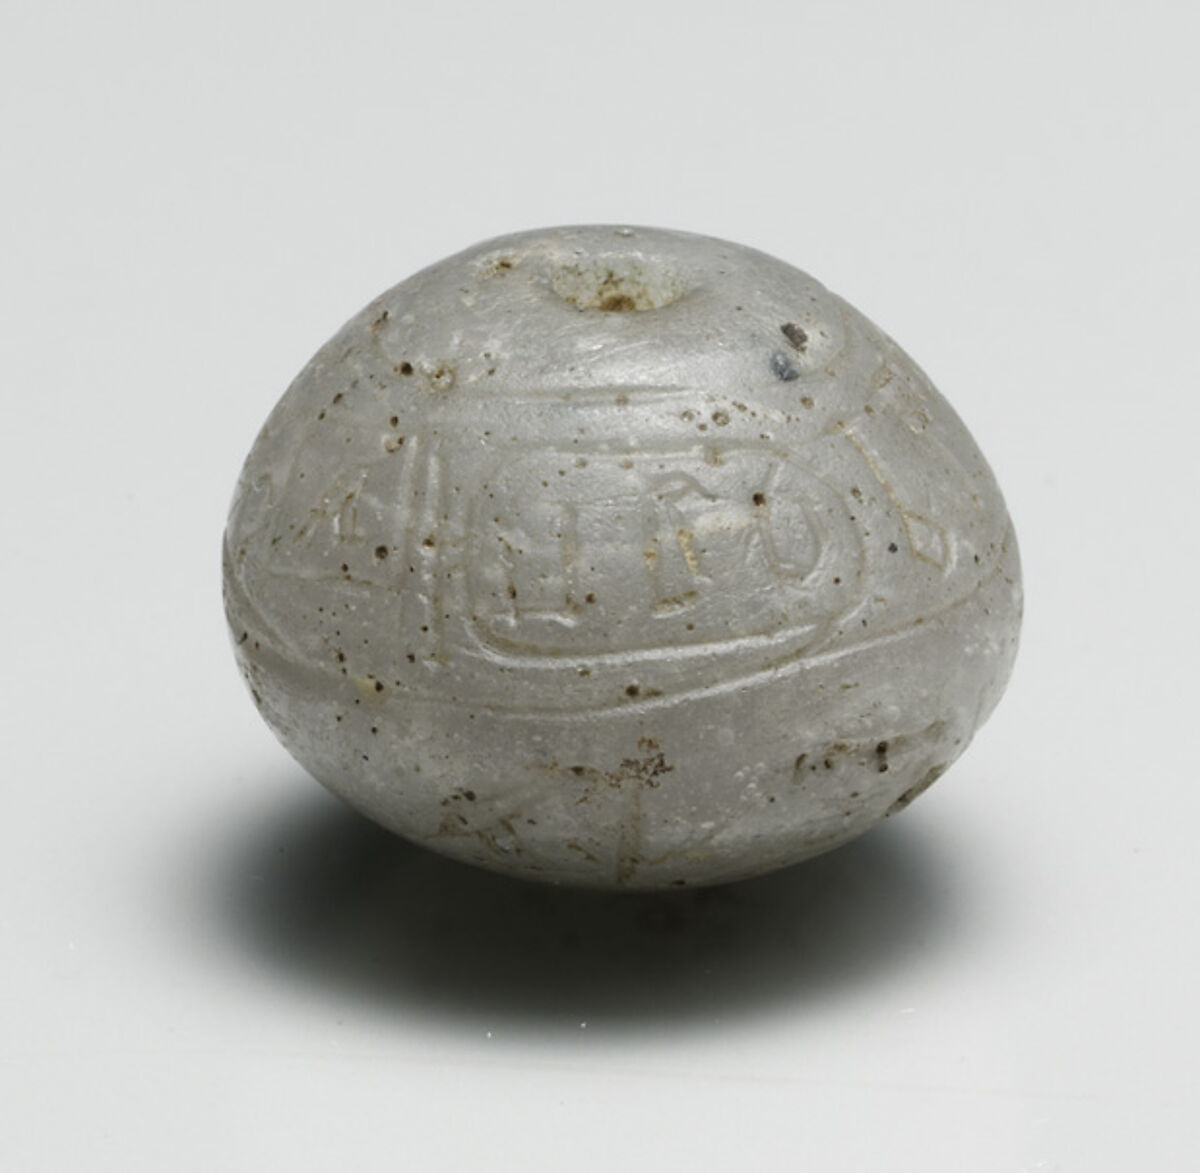 Ball Bead with the Names of Hatshepsut and the Overseer of Work Senenmut, Glass